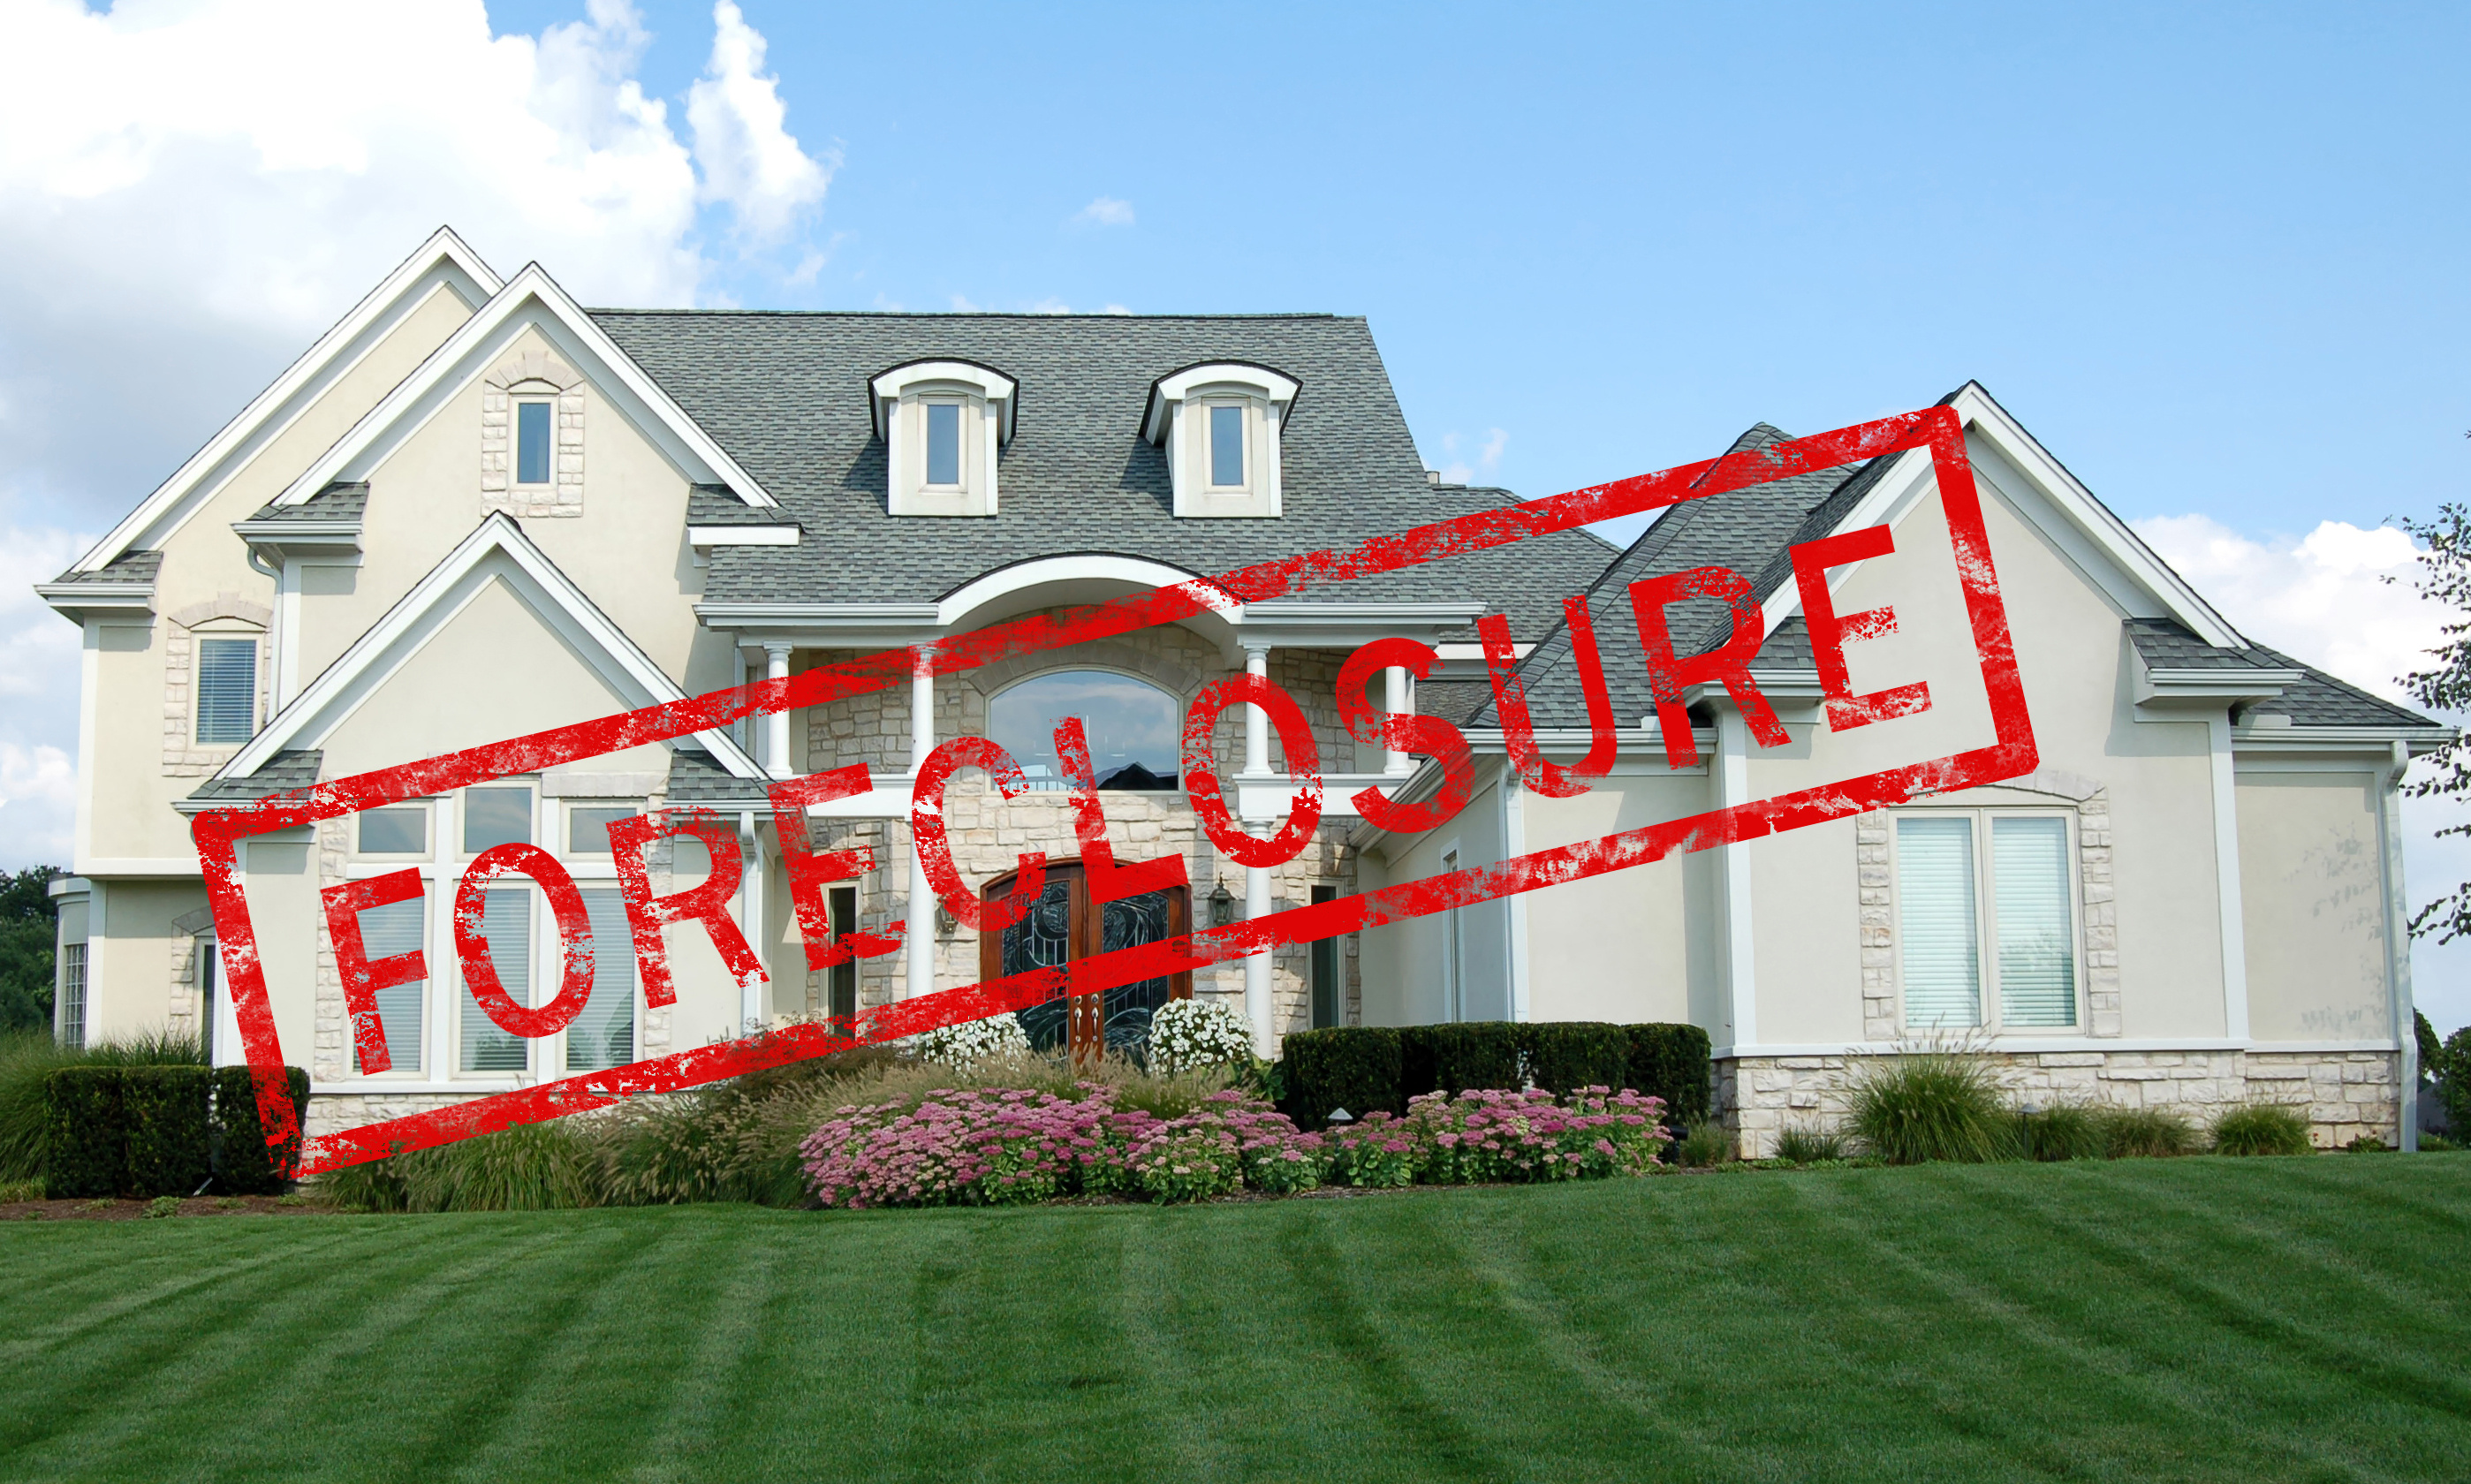 Call Upon The Rock Real Estate Services, LLC when you need valuations pertaining to Fulton foreclosures